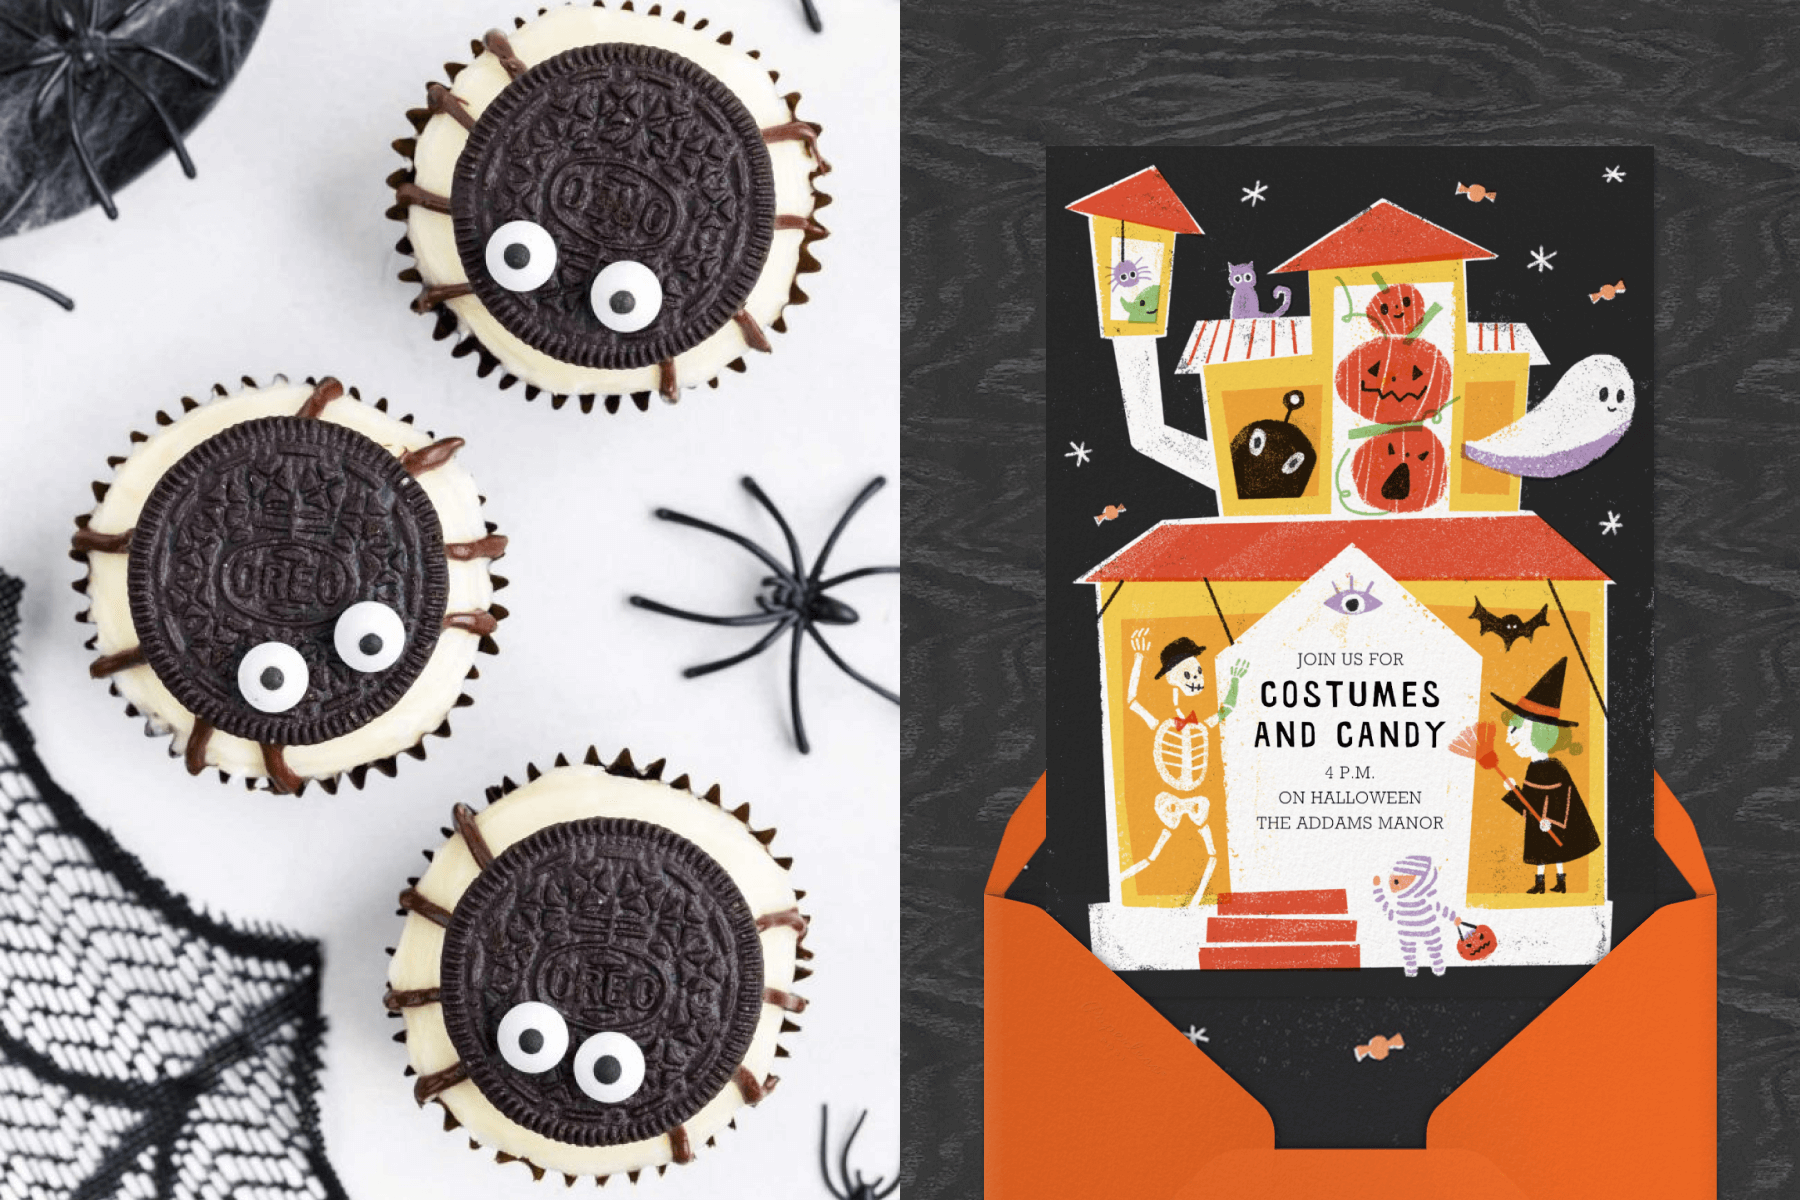 Left: “Spider” cupcakes with Oreo cookies atop white frosted chocolate cupcakes with eyes and legs drawn on. Right: A Halloween party invitation reads “Costumes and candy” with an illustration of a bright haunted house with friendly-looking skeletons, witches, jack-o-lanterns, and ghosts inside.